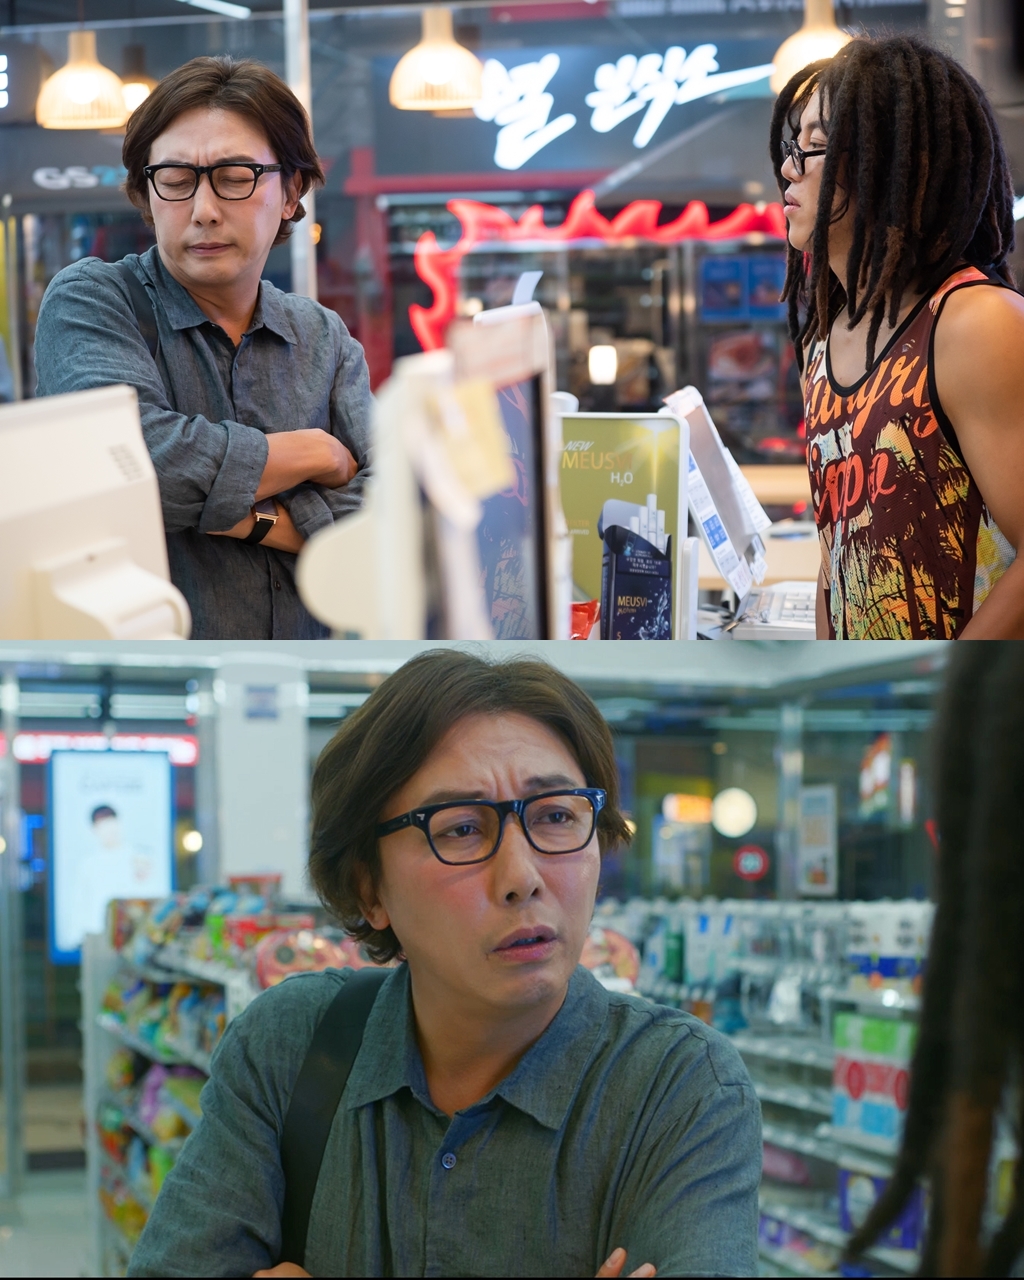 maekyung.com news teamTak Jae-hun will be on the Convenience store morning star.SBS Jackson Convenience store morning star is a special point of observation, and it is fun to wait for cameos appearing every time.Cameos who are unforeseenly happy to know when and when they will appear are considered to be the charm of Convenience store morning star.The still cut, which was released before the broadcast, was already caught by Tak Jae-hun, who was already drunk.Tak Jae-huns realistic expression, which makes him feel 100% of alcohol, also attracts Eye-catching, which is making an impression and spreading smack smoke.In addition, the red-colored sulton makeup adds comicality and makes a laugh.In front of this Tak Jae-hun, there is a friend Han Dal-sik (Minister Moon Moon-seok) of Choi Dae-heon (Minister Ji Chang-wook), not a star of the albasaeng Jeong Sae-sam (Min Yu-Jeong).The absence of a star is a point that stimulates curiosity.The star is emptying the checkout counter, where is it going, how is it going to run the half-time, and what happened in the Convenience store?Earlier, Choi Dae-heon and the Convenience store where the star worked attracted a variety of cameos to attract Eye-catching.Yu Yu-bi was a dog mother who loved and loved dogs, and Jung Jun-ho appeared as actor Jung Jun-ho and left a sign on the Convenience store.Ahn Chang-hwan, who appeared as a nighttime Alba applicant, met with Mung Mun-seok who came to the Convenience store and enjoyed the audience by comically acting the reunion of In addition, Convenience store morning star is gaining great popularity by doubling the fun of the drama with various cameo use.Tak Jae-hun, who will appear today (the third day), is drawing attention to what kind of sparkling fun he will have.The fifth episode of SBSs Lamar Jacksons Convenience store morning star, which is featured by Tak Jae-hun, is today (3rd) at 10 p.m.